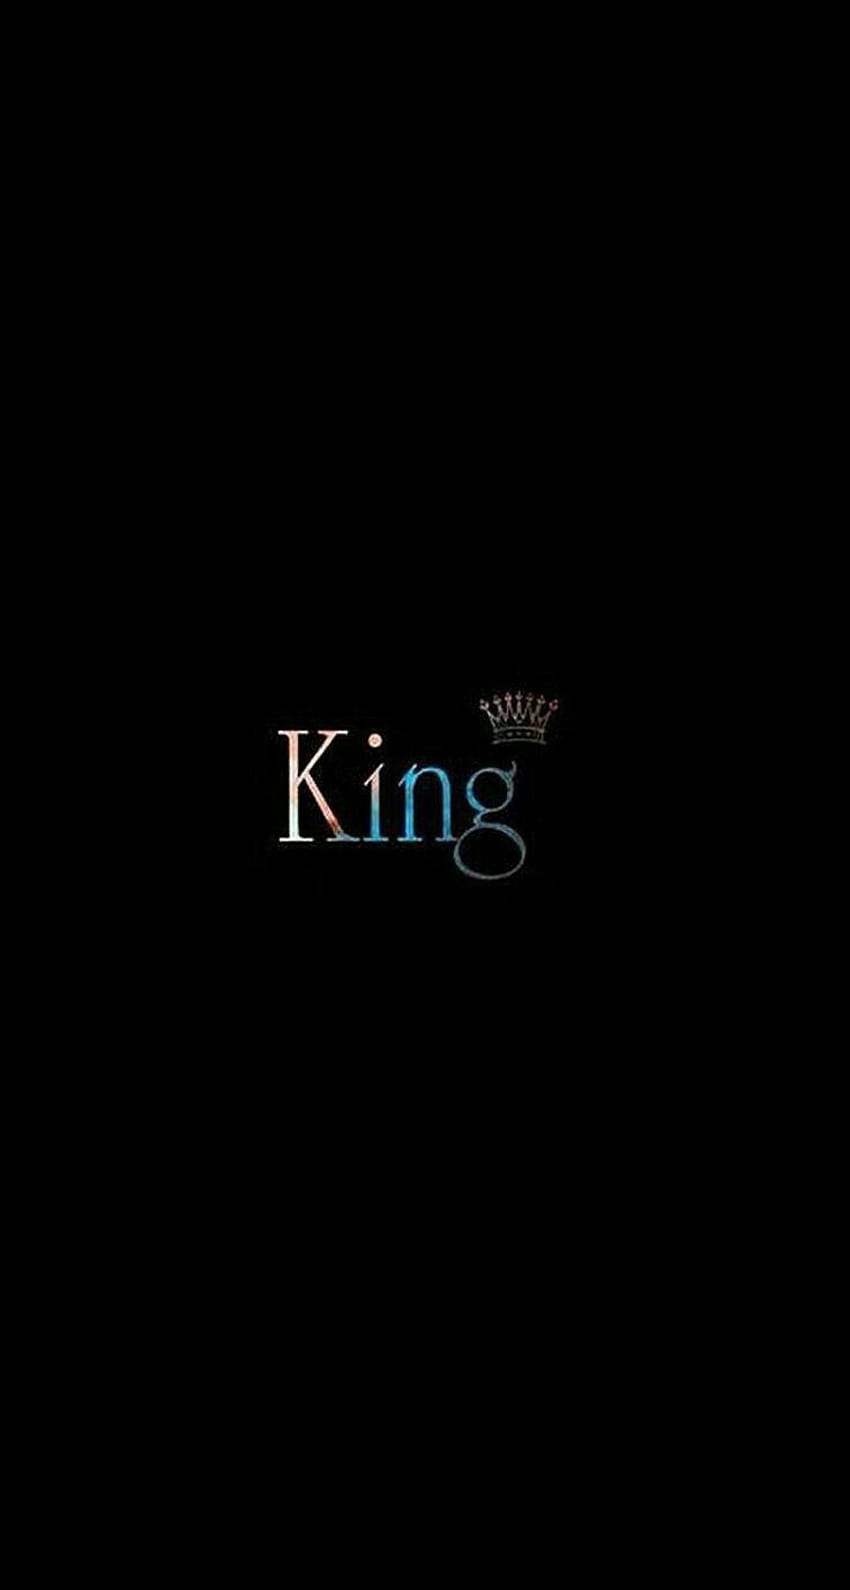 kc Miguel Cabani on, king logo for mobile HD phone wallpaper